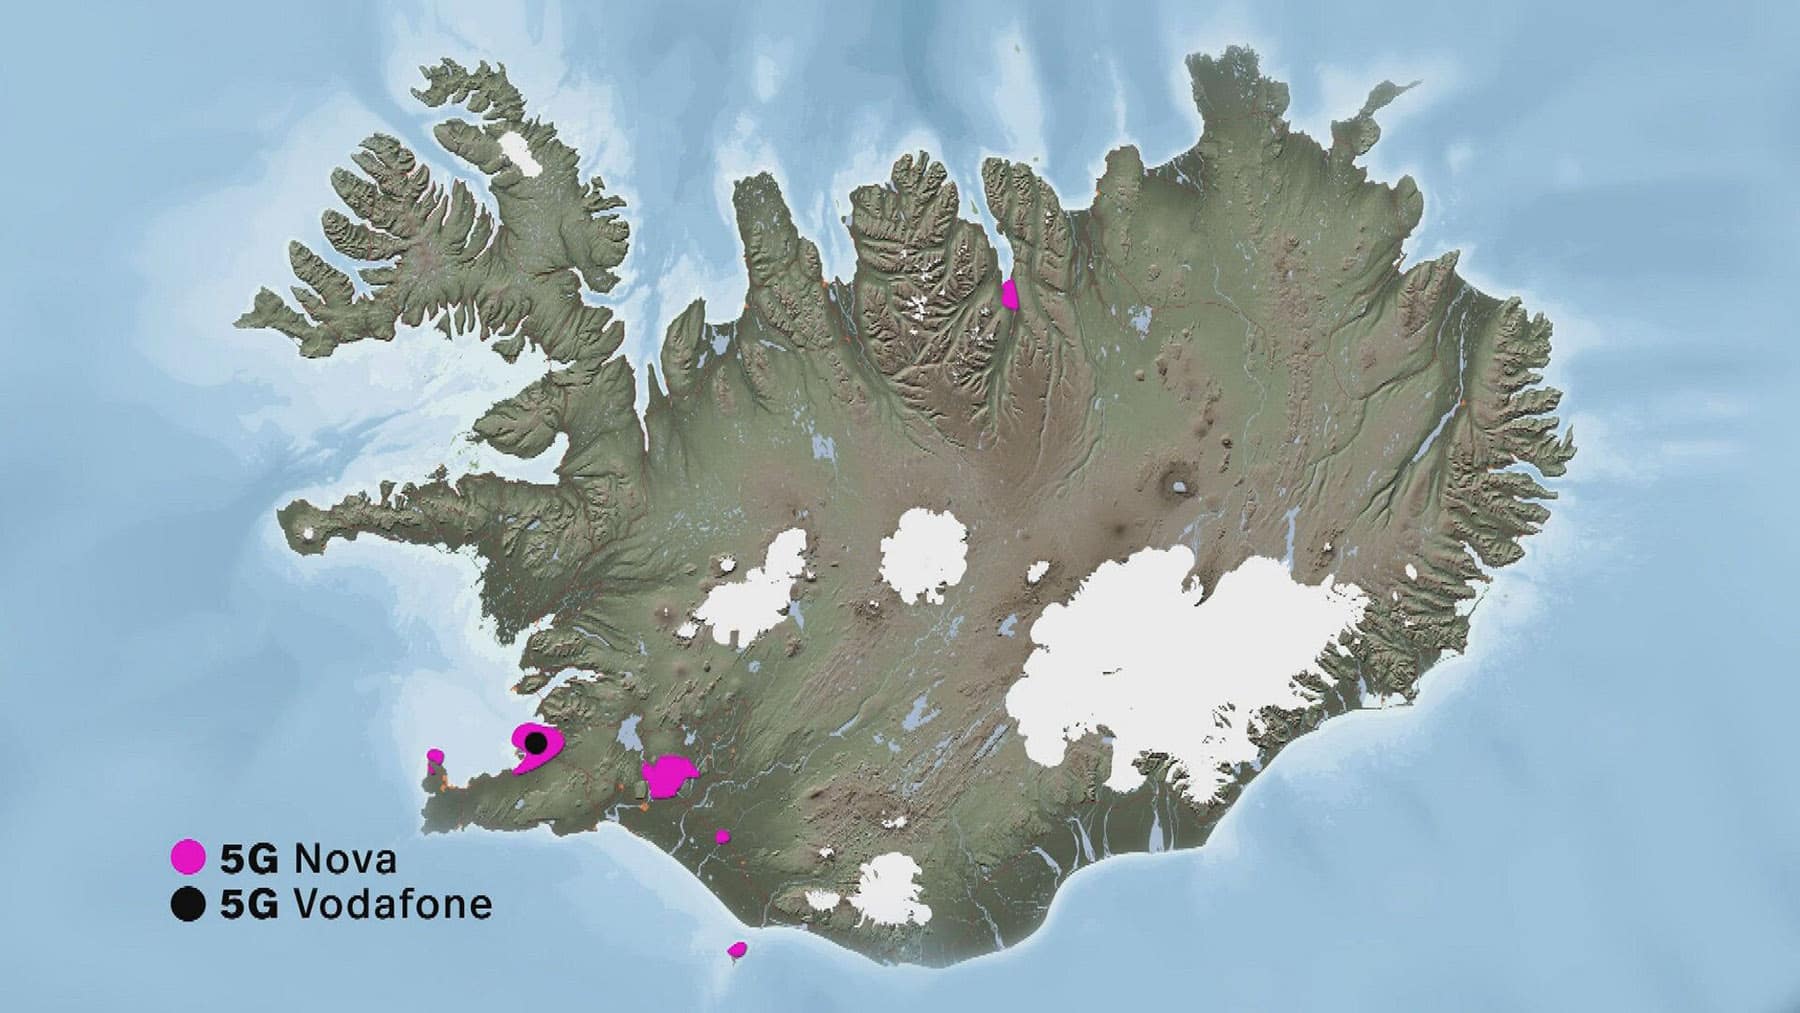 A map of Iceland showing RÚV’s main 5G rollout service providers.